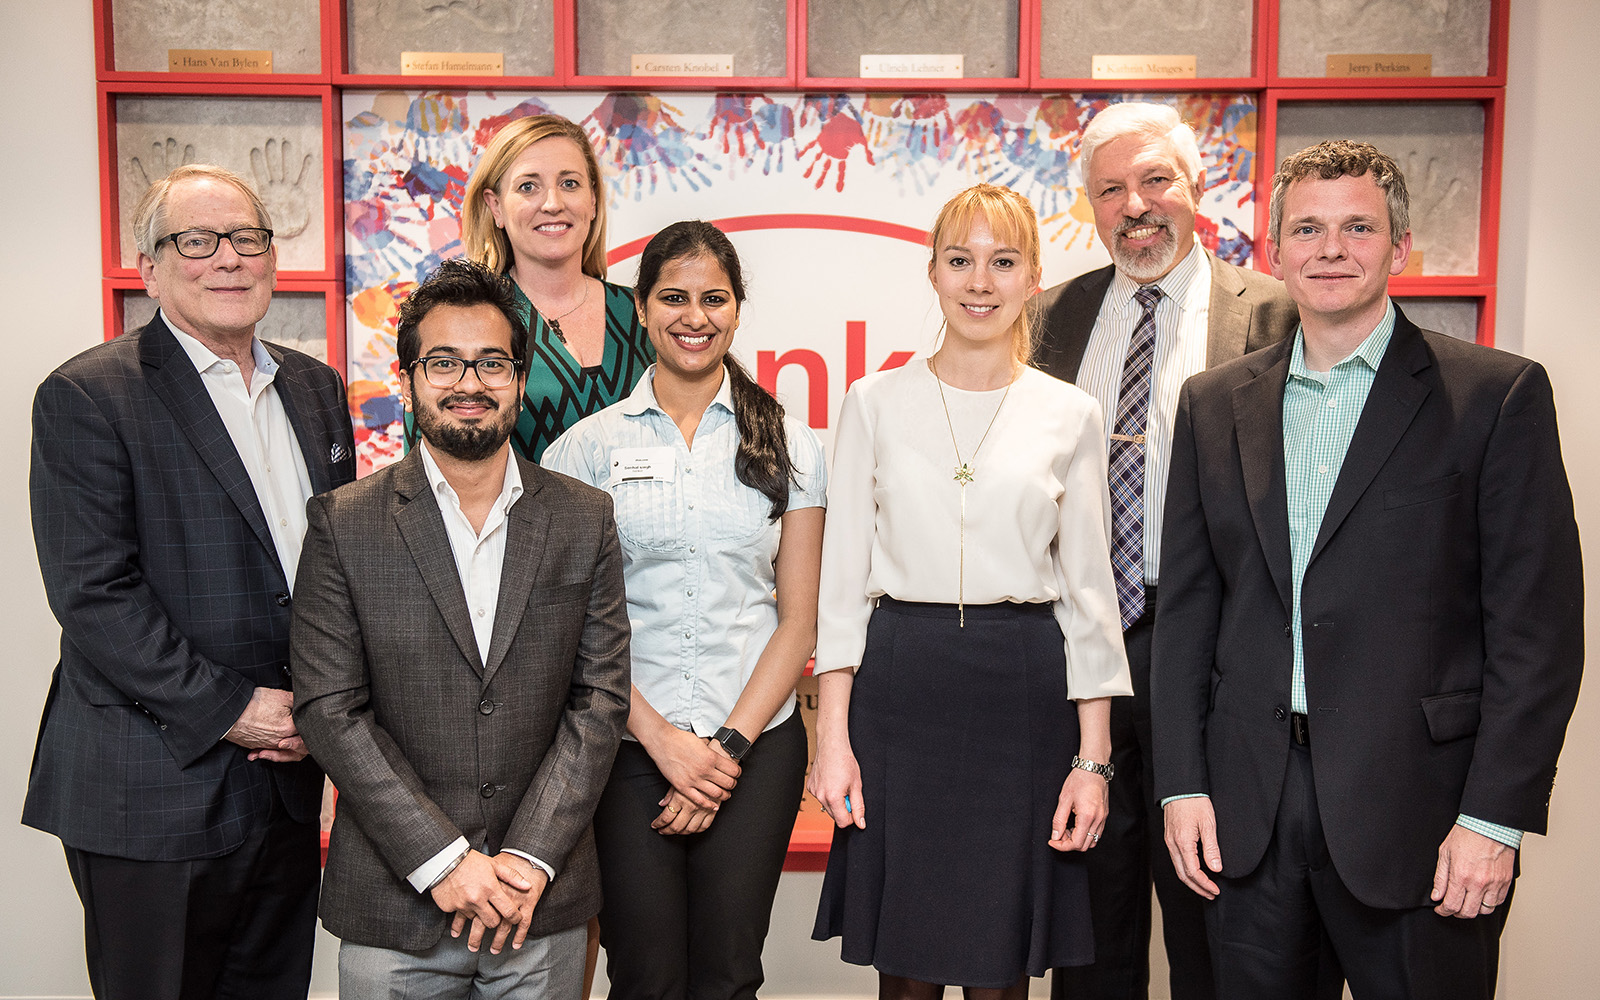 As part of UConn’s Experiential Learning Collaborative (ELC), graduate students worked with Henkel Corp. this spring to identify new opportunities for business growth and competitive advantage. Above are some of the participants, including, from left: Martin Donner, ELC project mentor; Niraj Sharma ’18 MSBAPM; Kimberly Newton, a vice president at Henkel; Ankita Padwal ’18 MSBAPM; Kseniia Poirkina ’18 MBA; Greg Kivenzor, ELC director, and Brad Wade, director at Henkel. (Nathan Oldham/UConn School of Business)